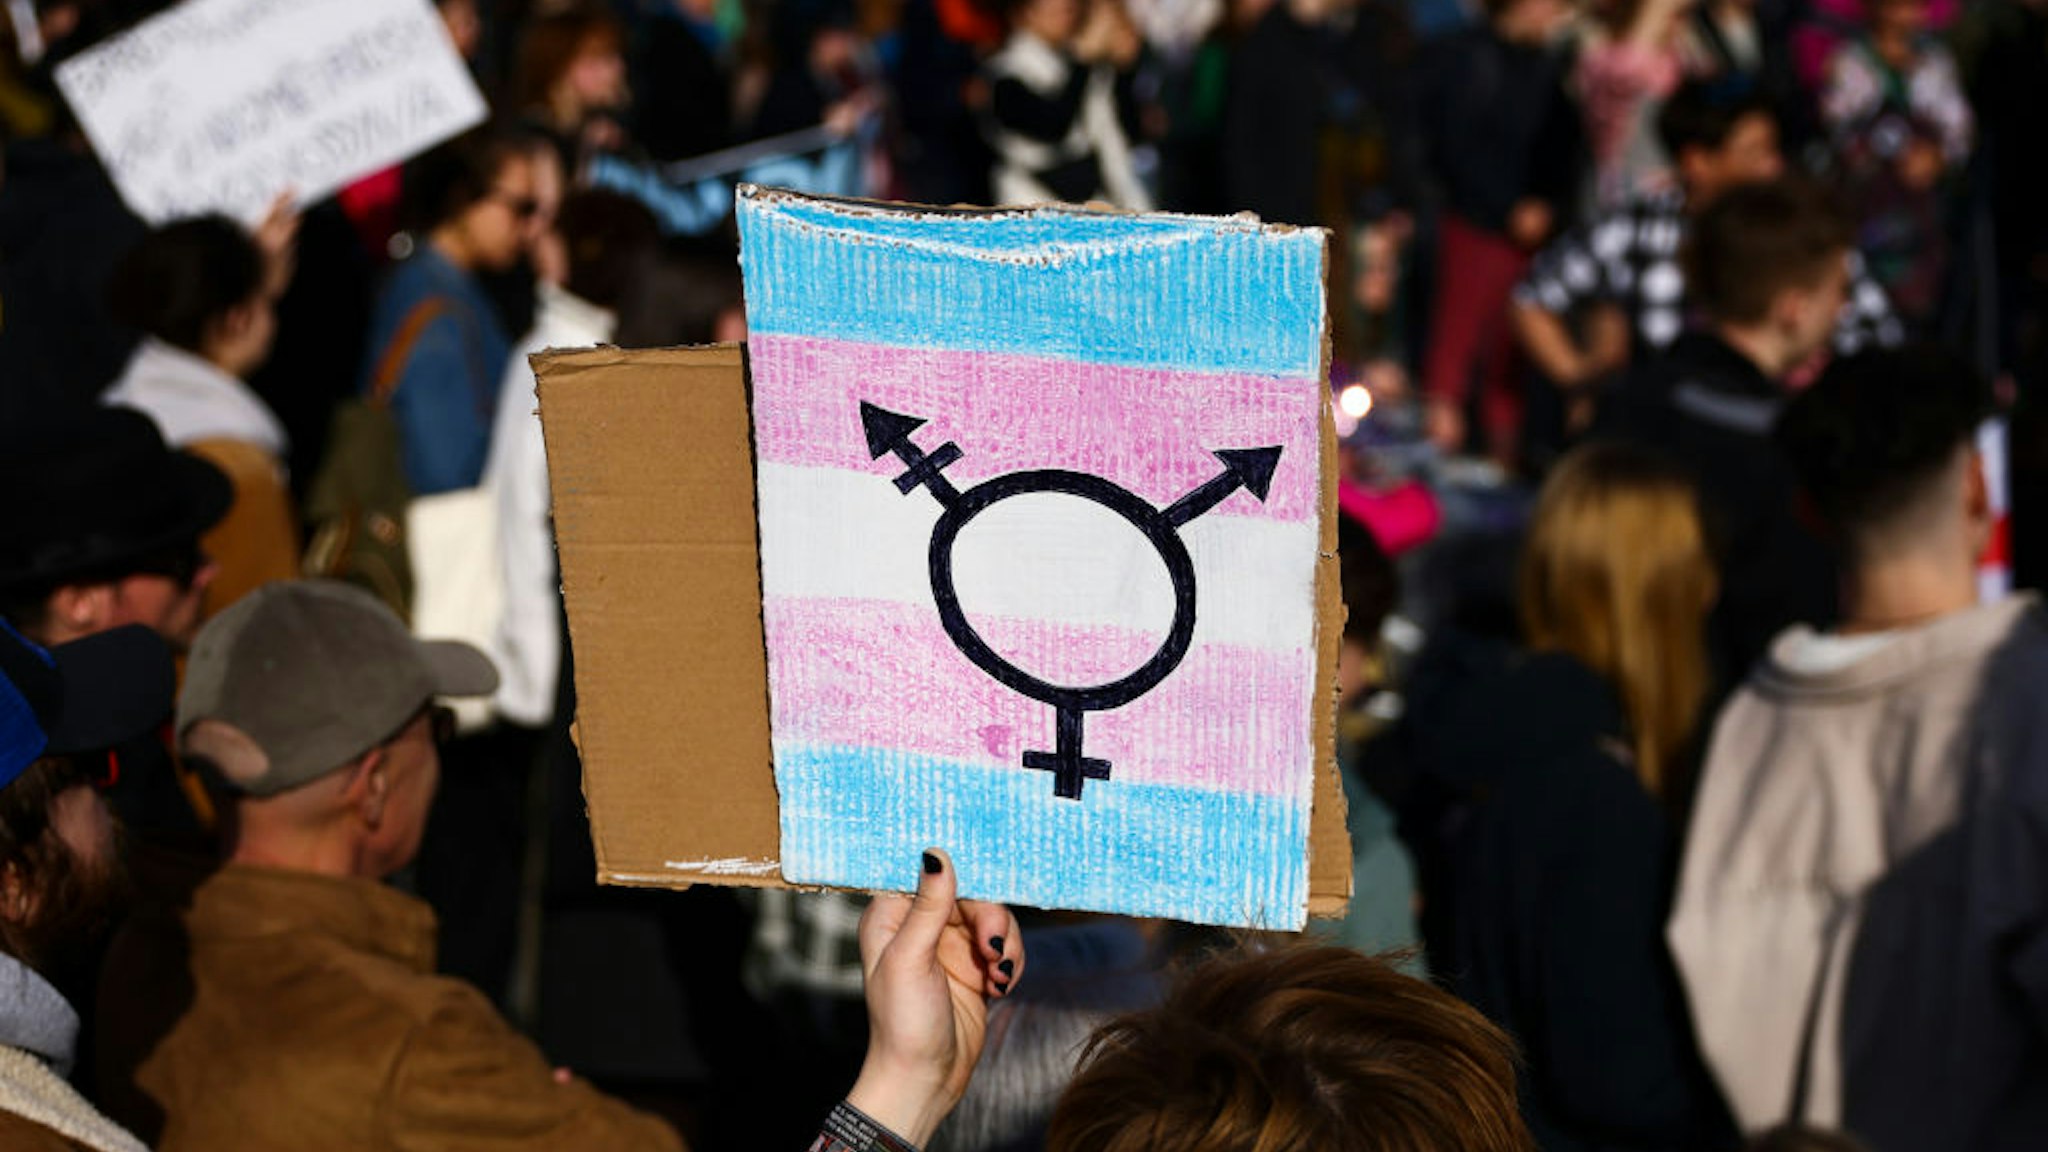 Transgender symbol is seen on a banner during an annual 'Manifa' march in Krakow, Poland on March 18, 2023. This year's 18th edition of Krakow's Manifa was held under a slogan 'Each of us is important' with participants demanding abortion rights. (Photo by Beata Zawrzel/NurPhoto via Getty Images)